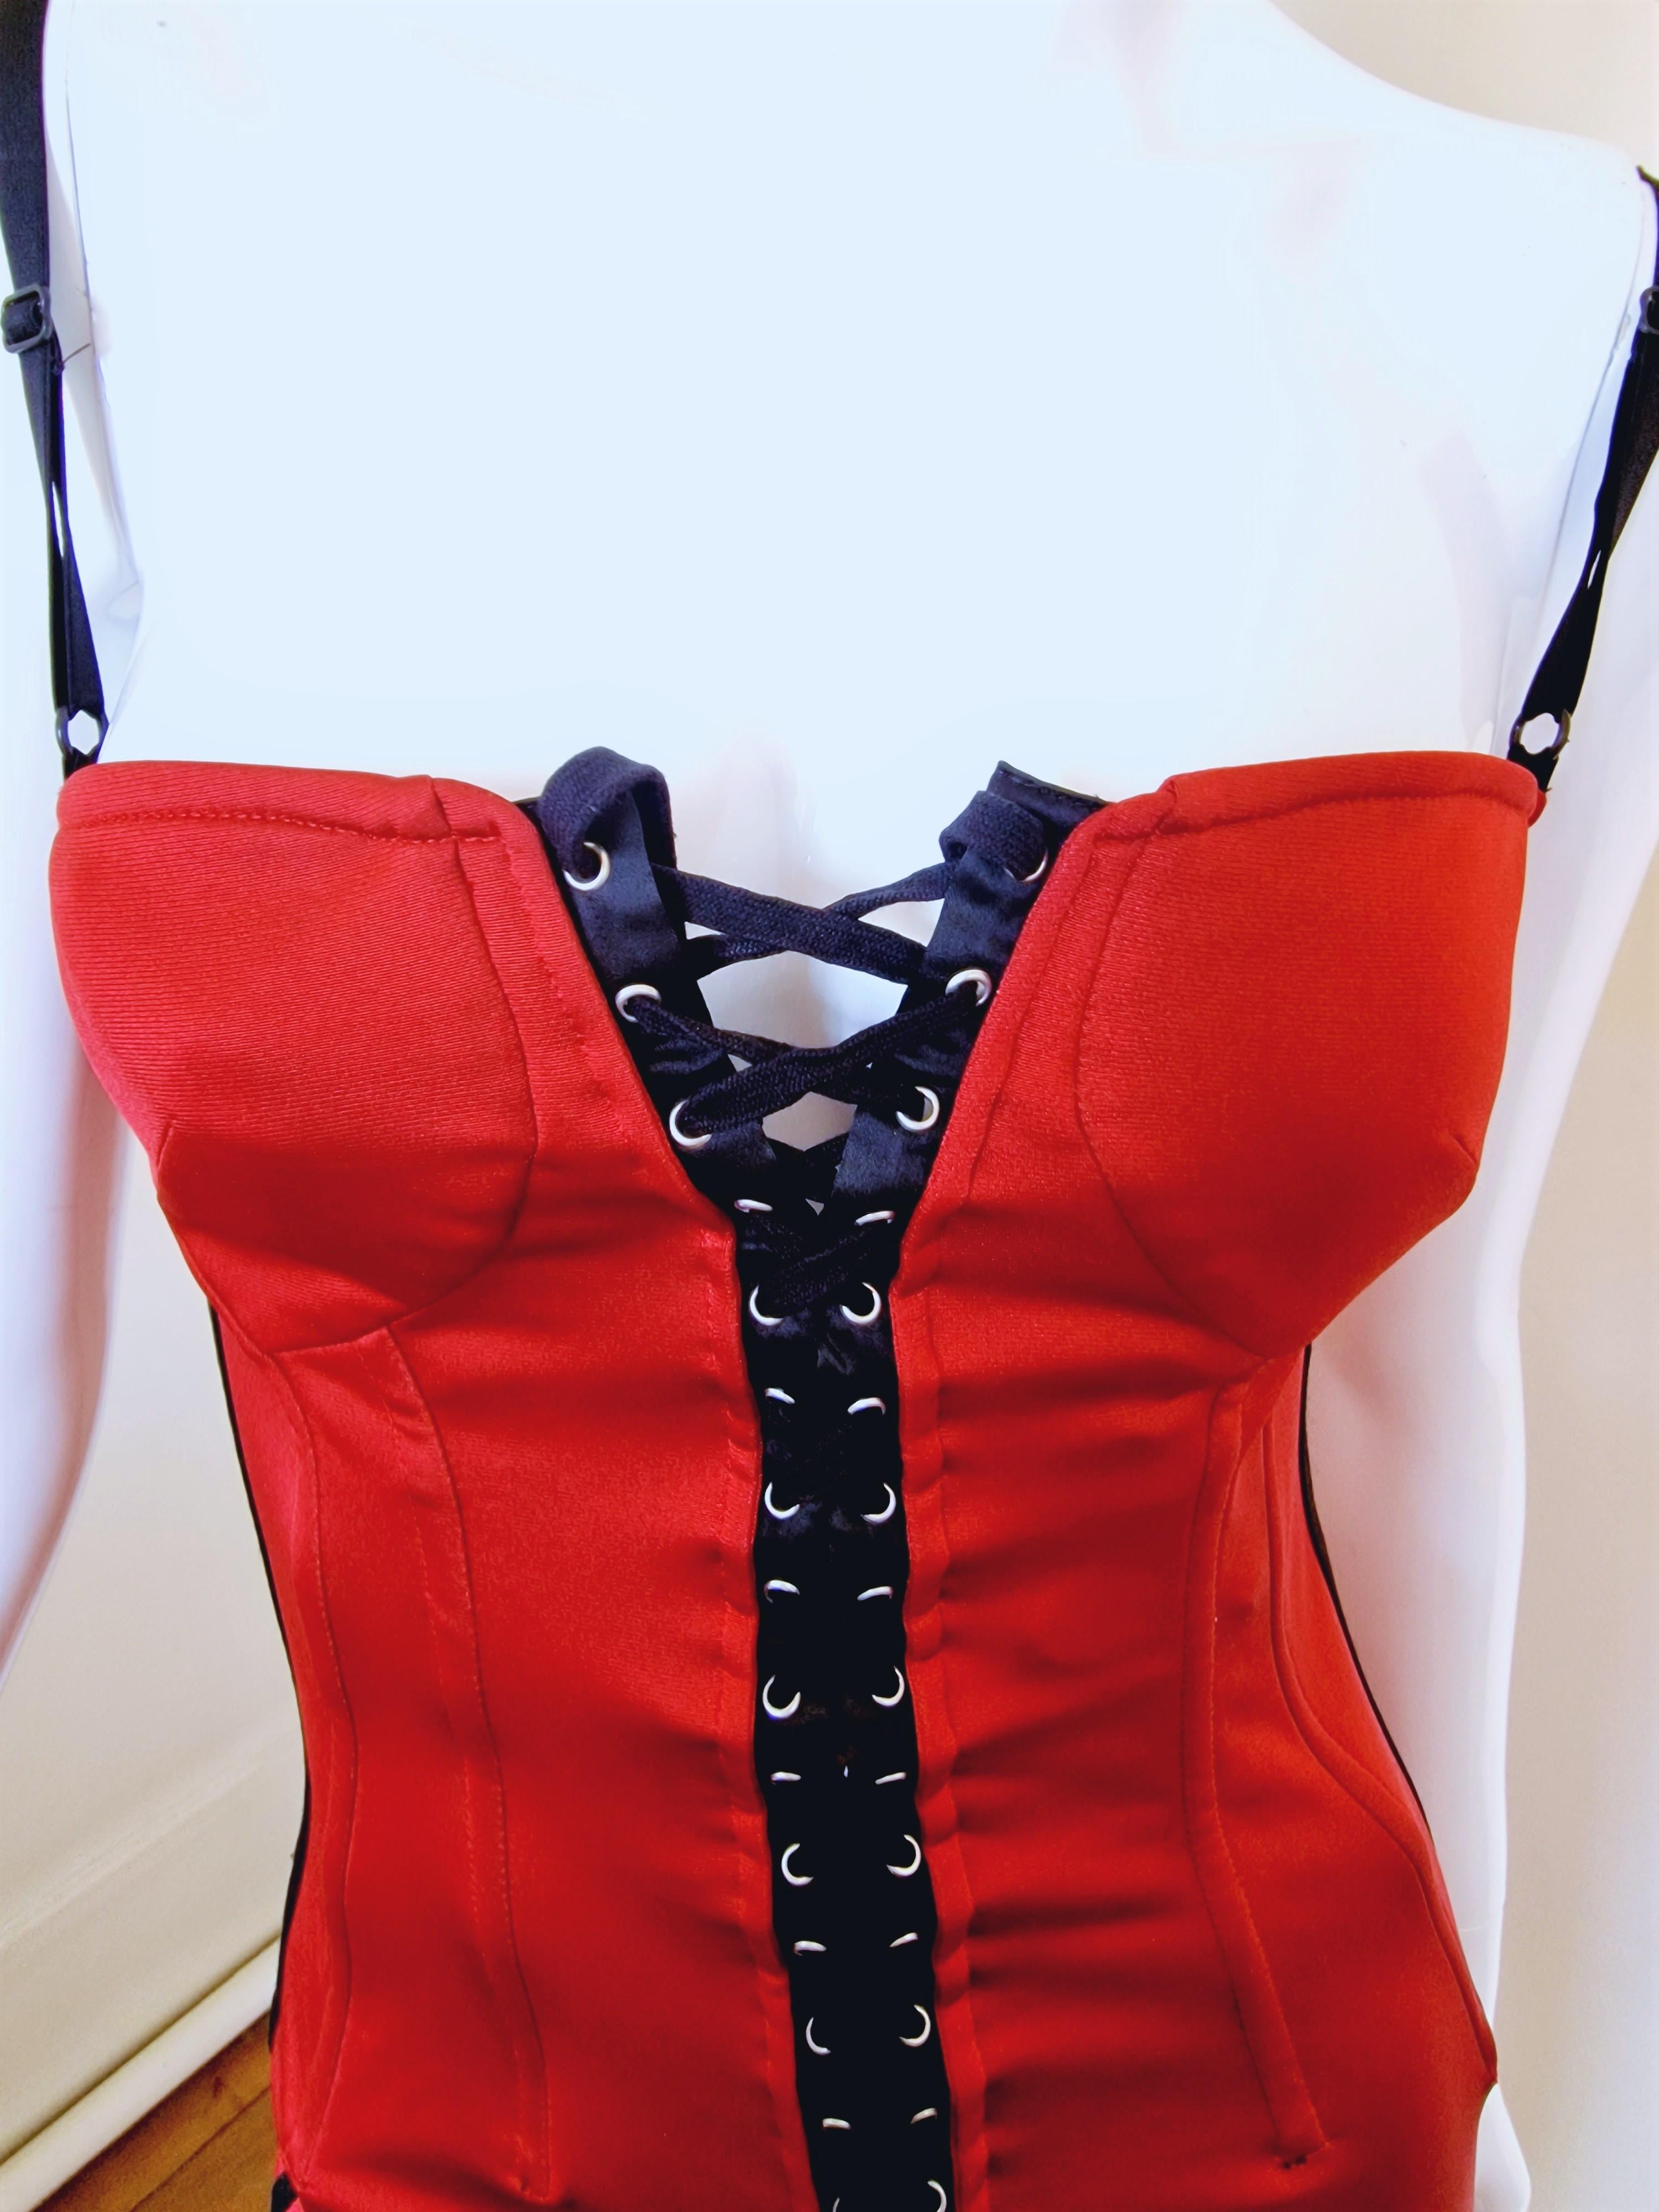 D&G Dolce and Gabbana Radio Corset Lace Up Bustier Cocktail Top Corset Dress For Sale 4